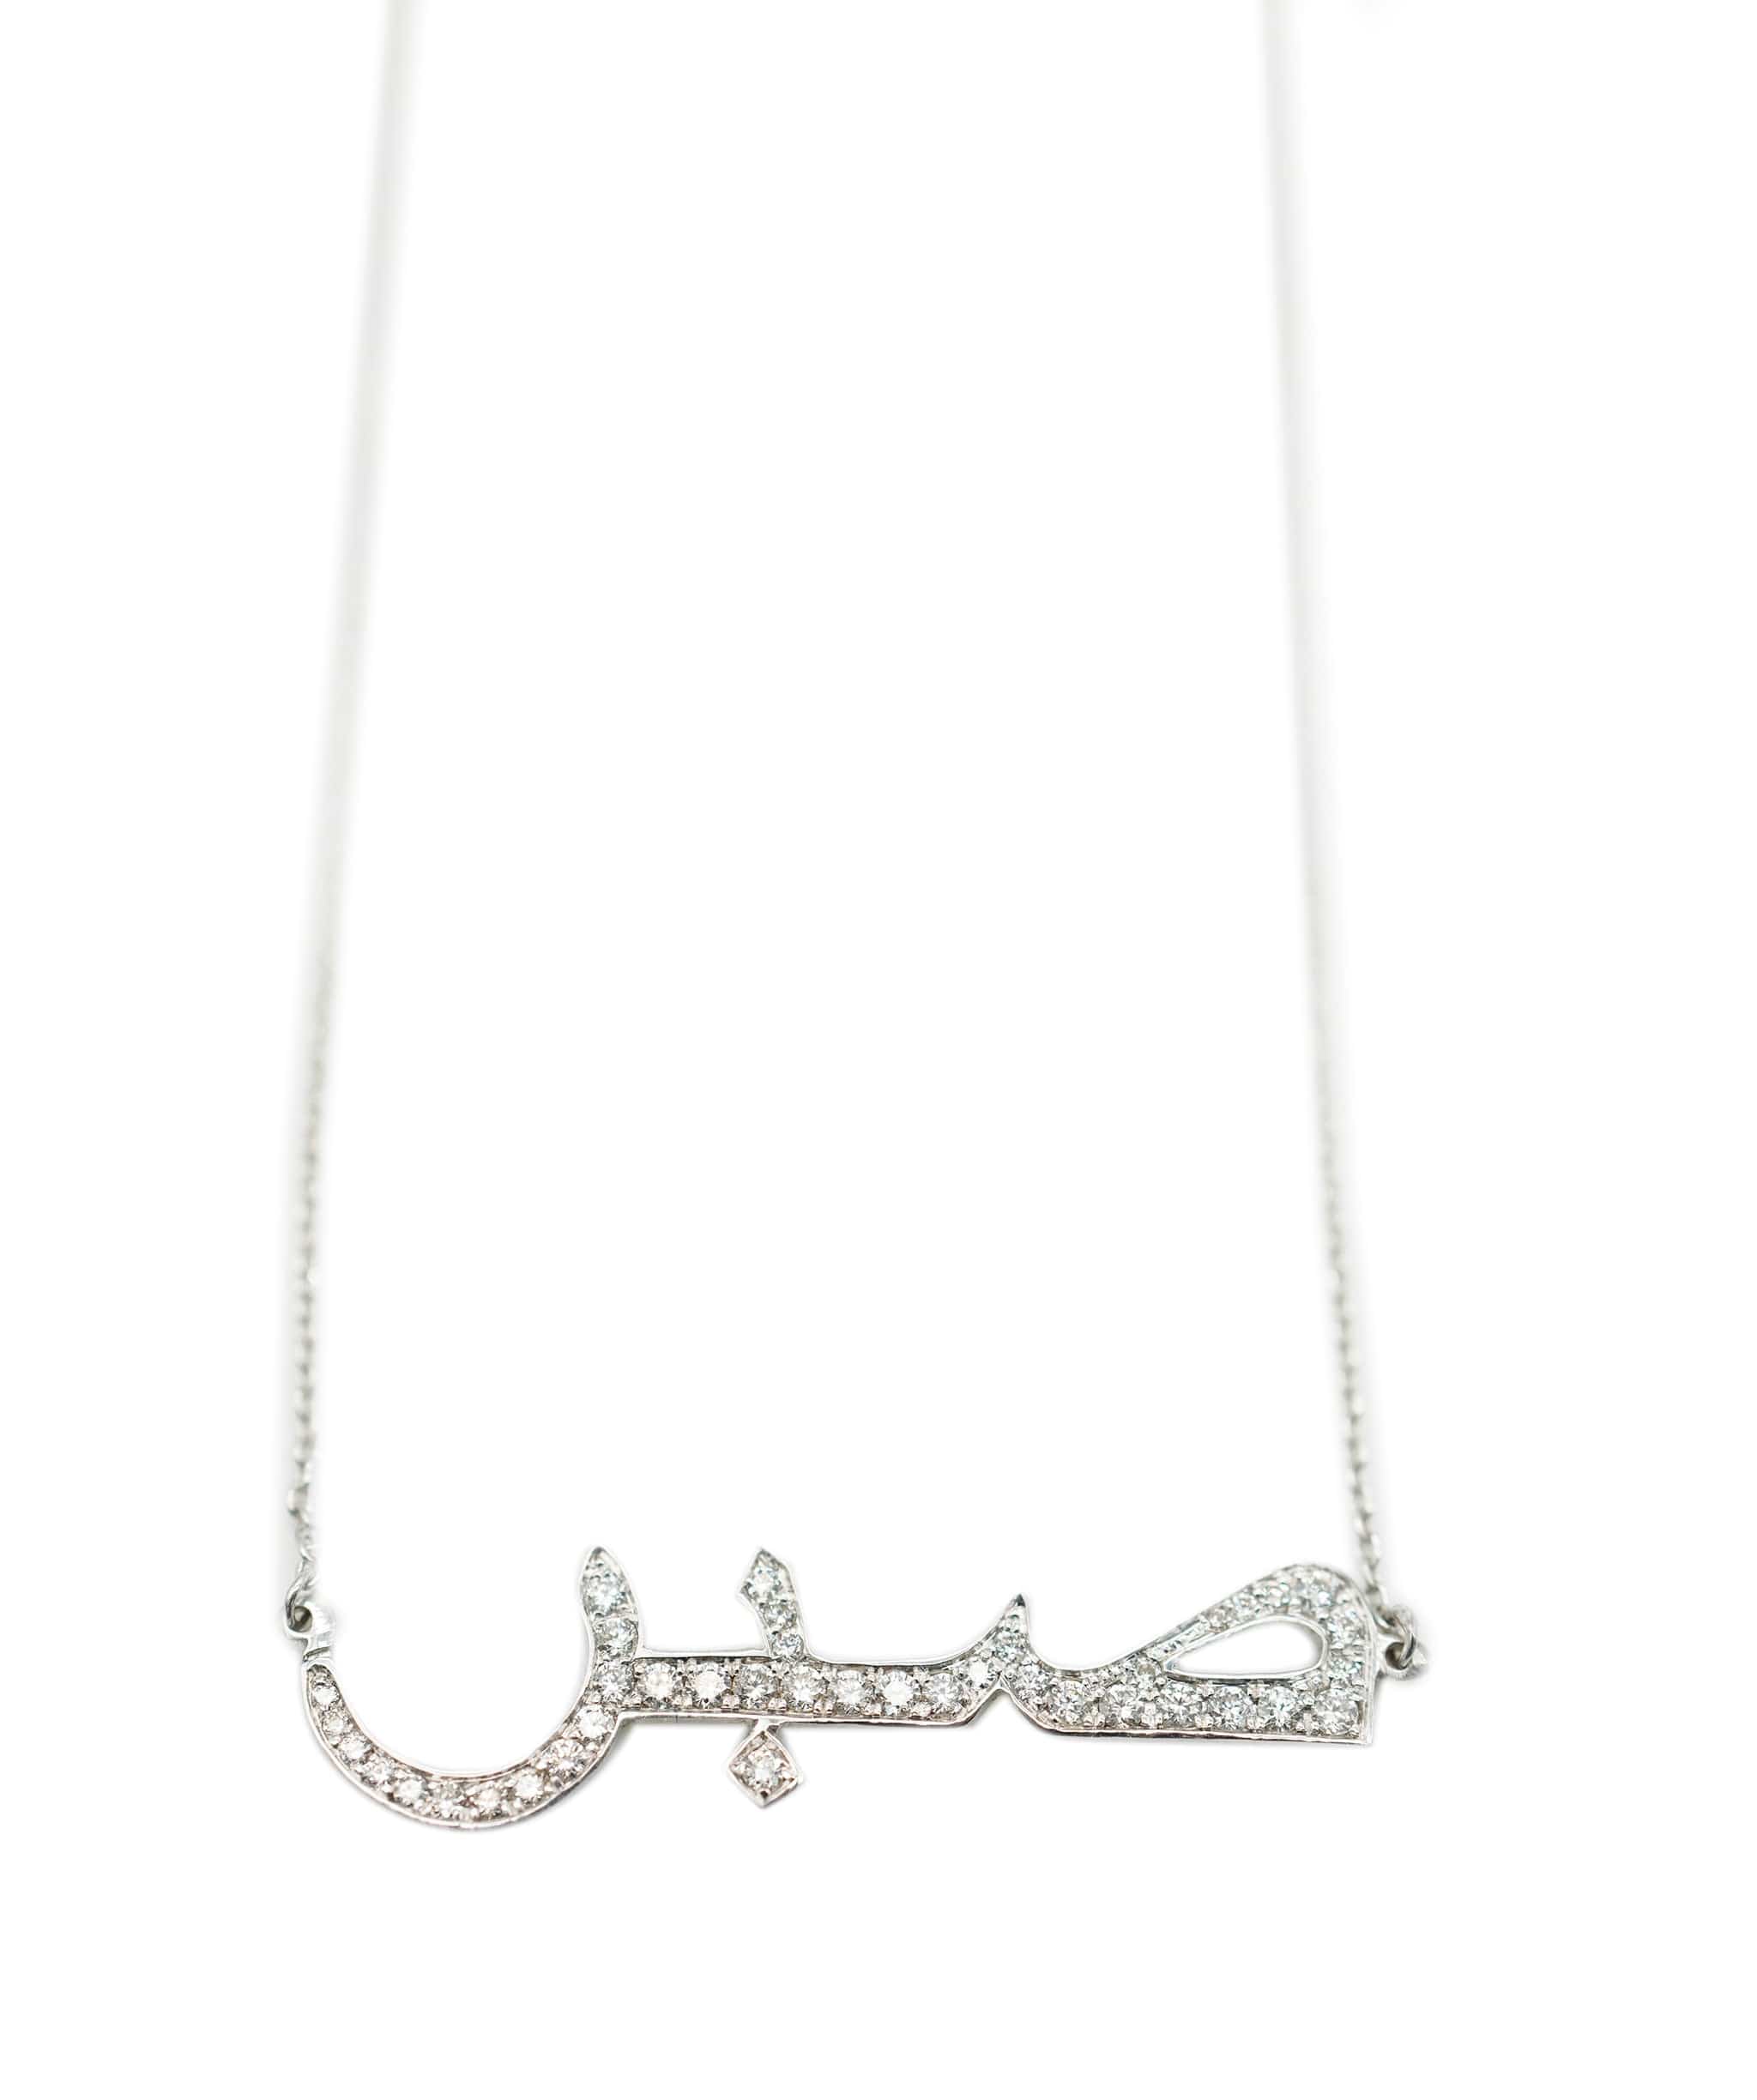 Luxury Promise Patience ‘SABR’ in Arabic Diamond Necklace 18K White gold ASC1925